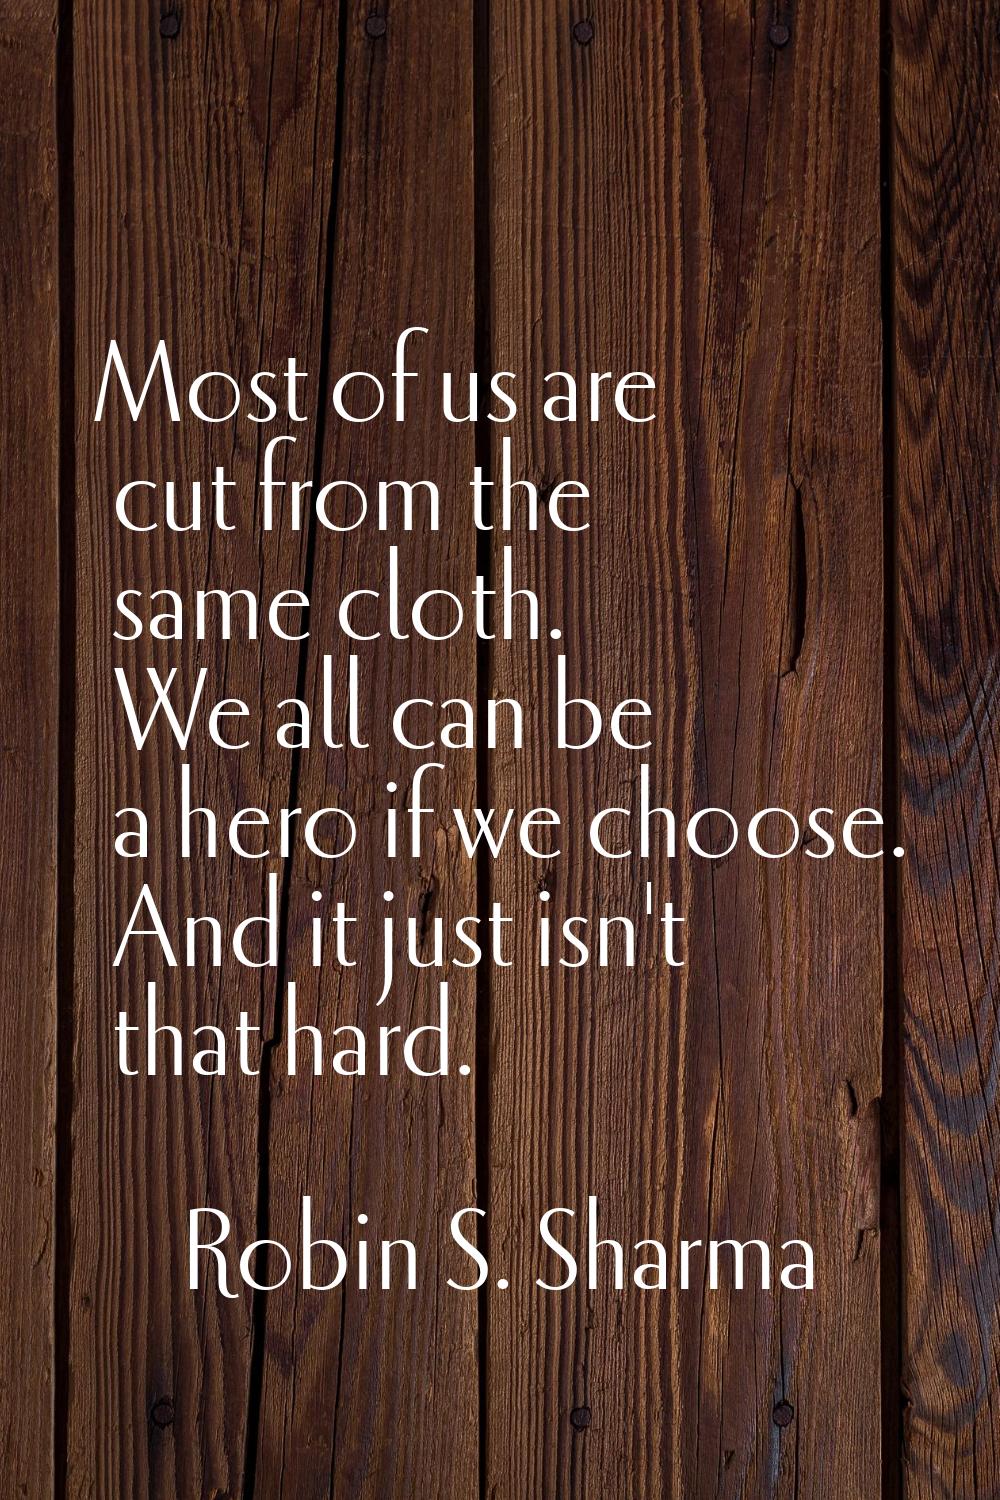 Most of us are cut from the same cloth. We all can be a hero if we choose. And it just isn't that h